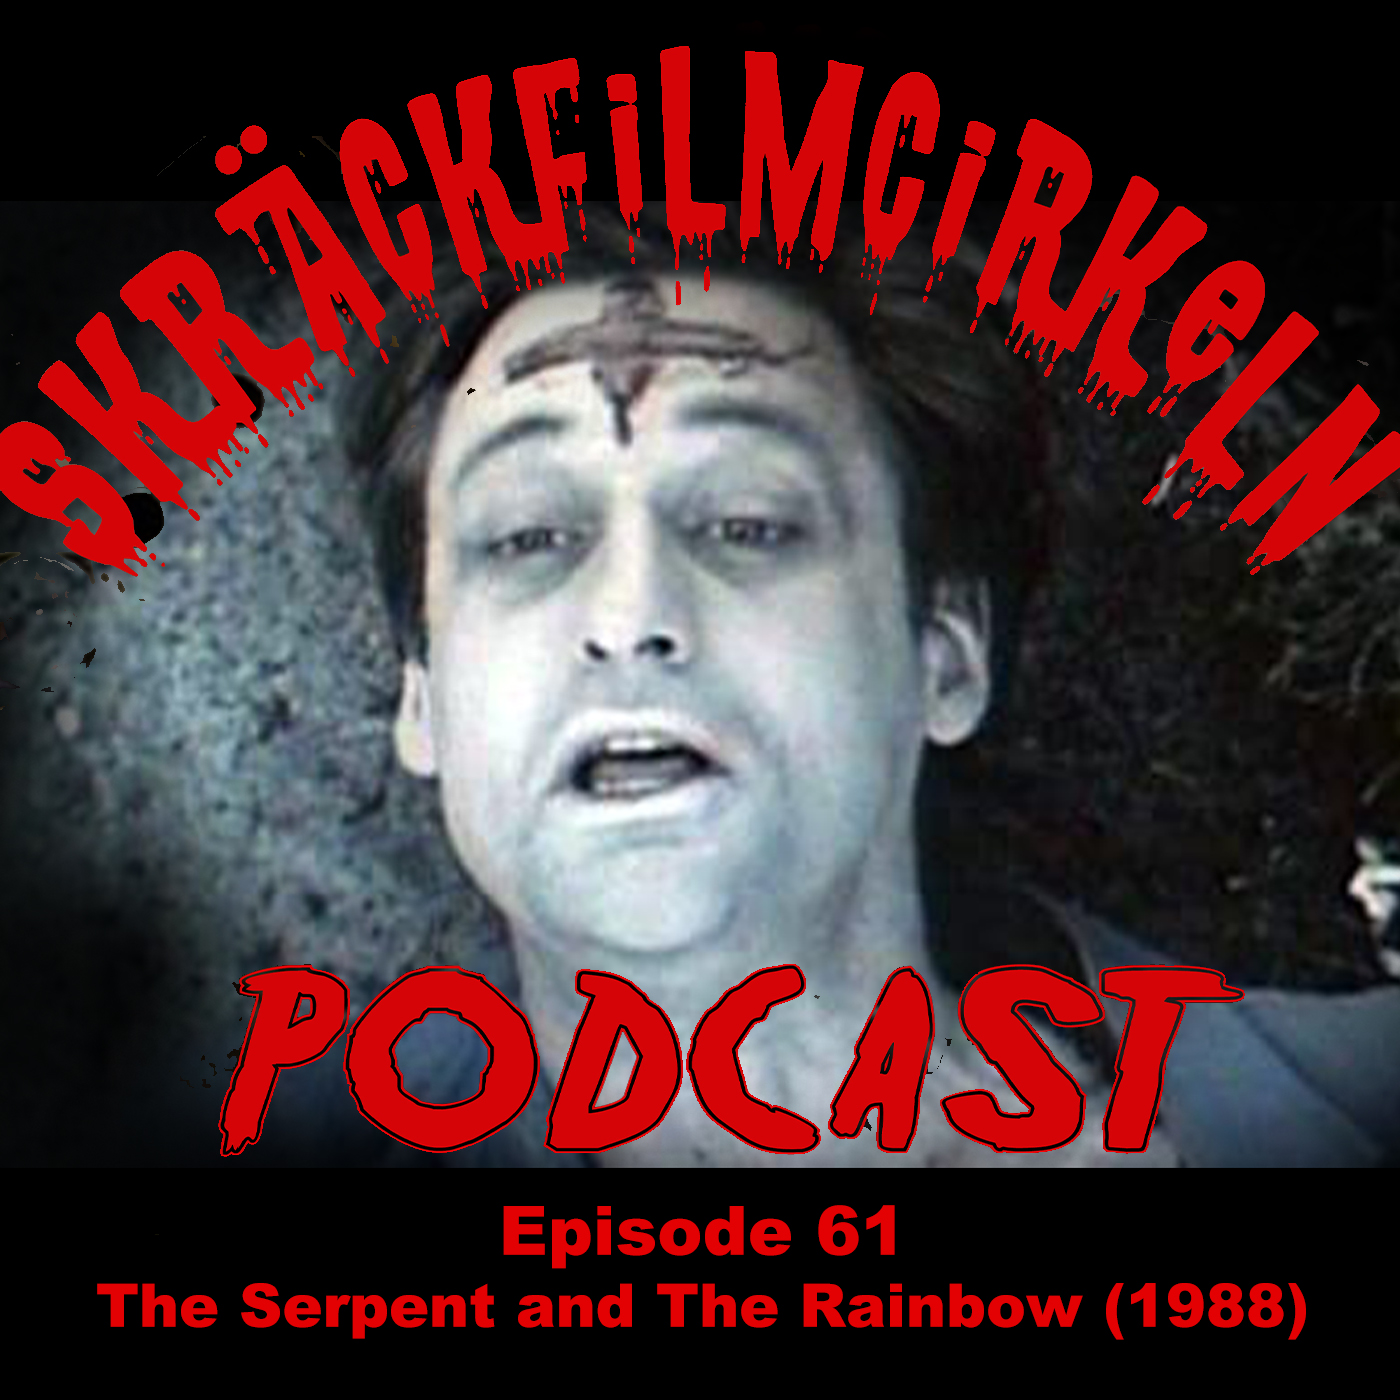 Episode 61 – Wes Craven – The Serpent and The Rainbow 1988